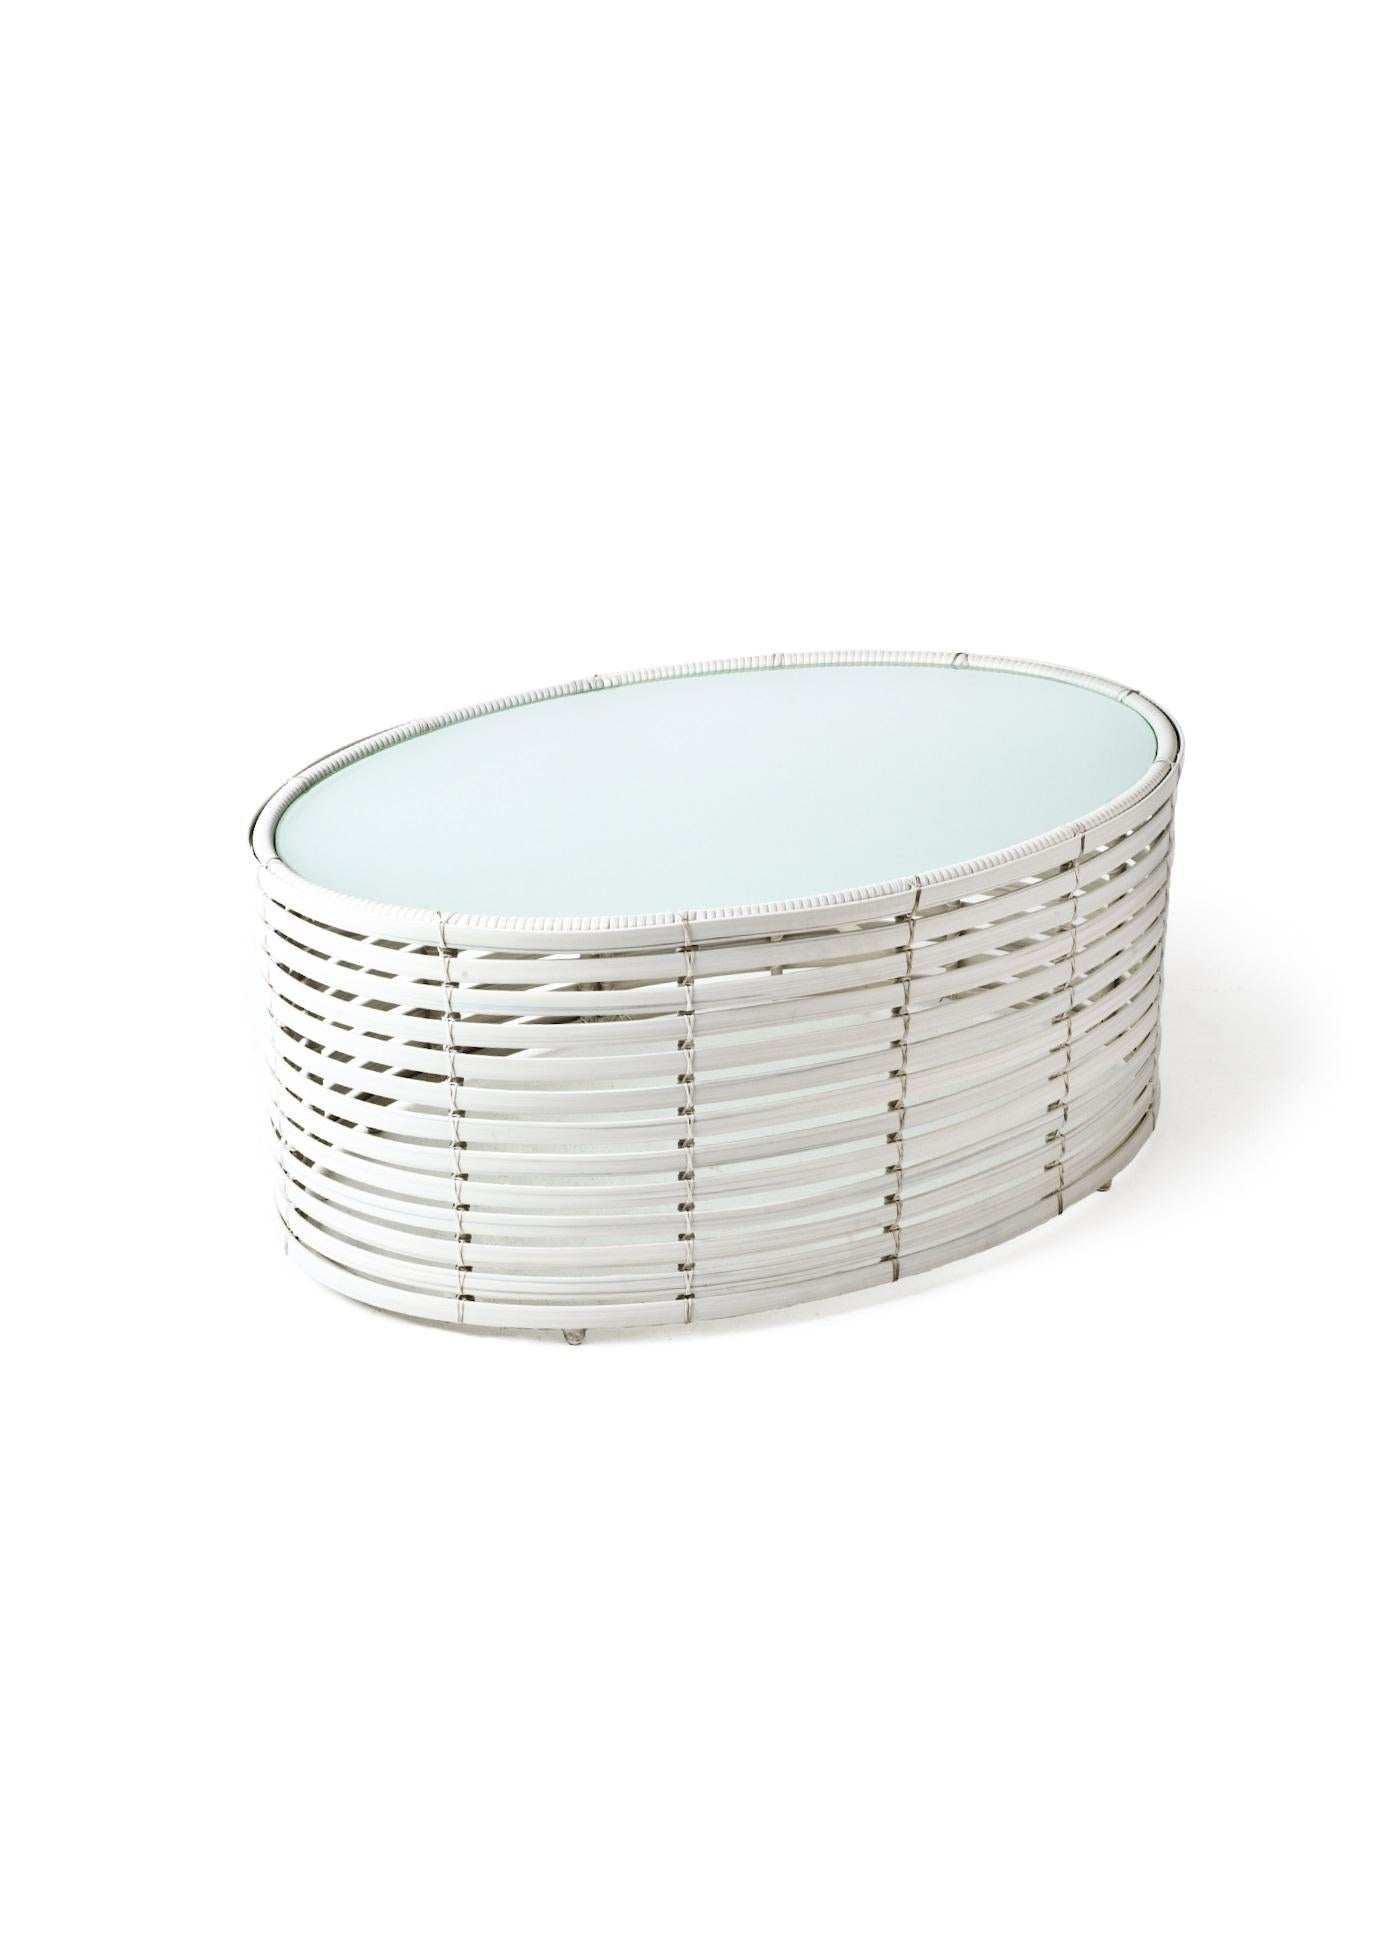 Indoor medium oval Lolah coffee table by Kenneth Cobonpue.
Materials: nylon, steel, rattan. glass.
Also available in other colors and for outdoors.
Dimensions: 
glass 58 cm x 88 cm x H 6 mm.
table 60 cm x 90 cm x H 40 cm.

Created using